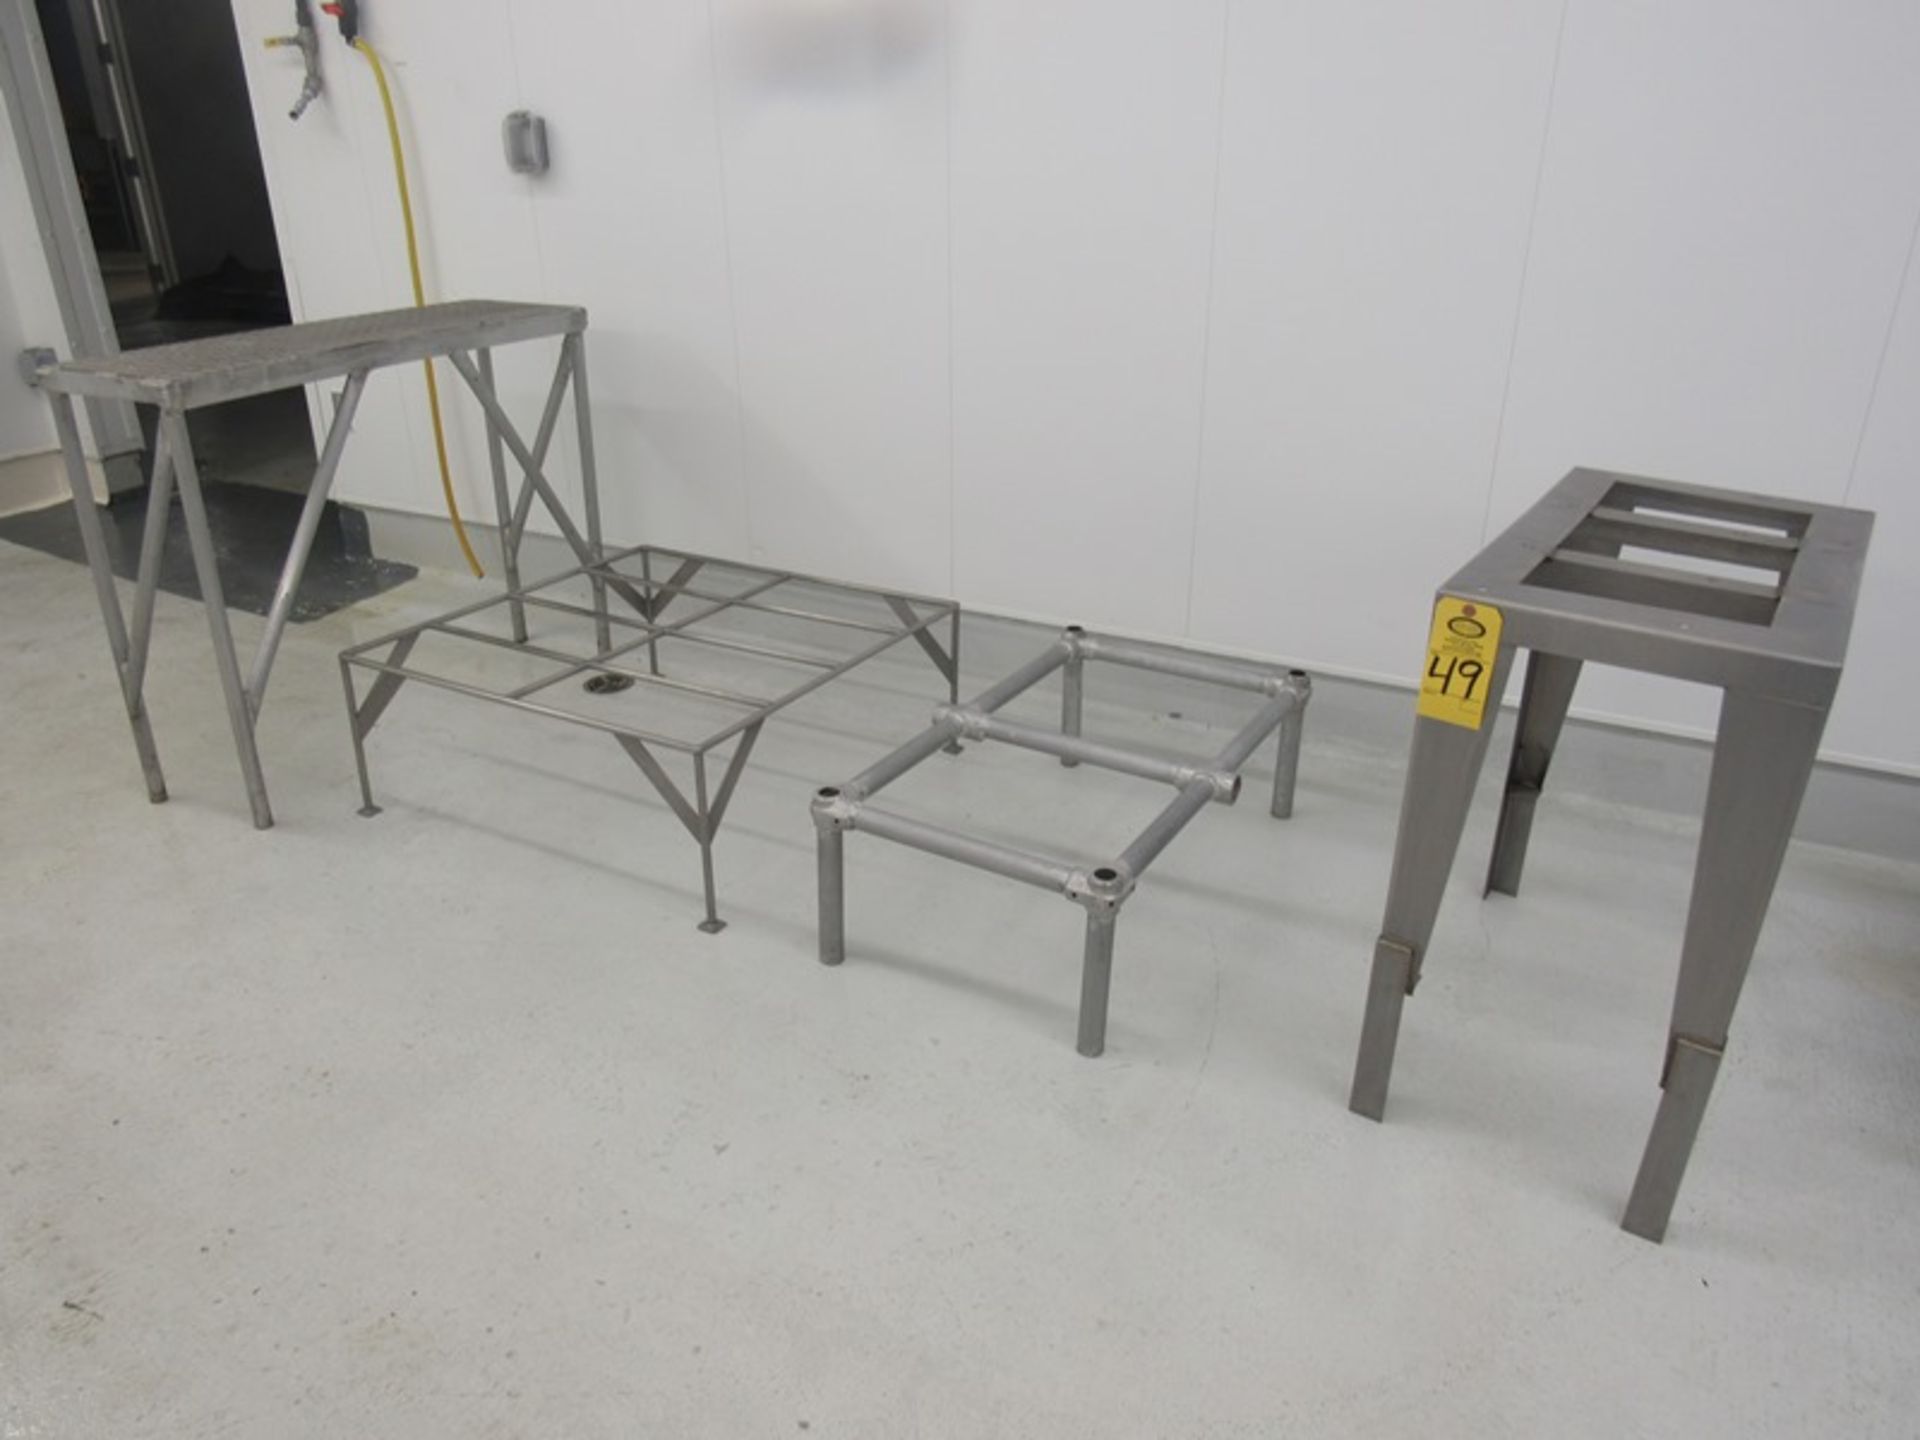 Lot of (2) Stainless Steel Dunnage Racks, (1) Stainless Steel Tote Rack & (1) Stainless Steel